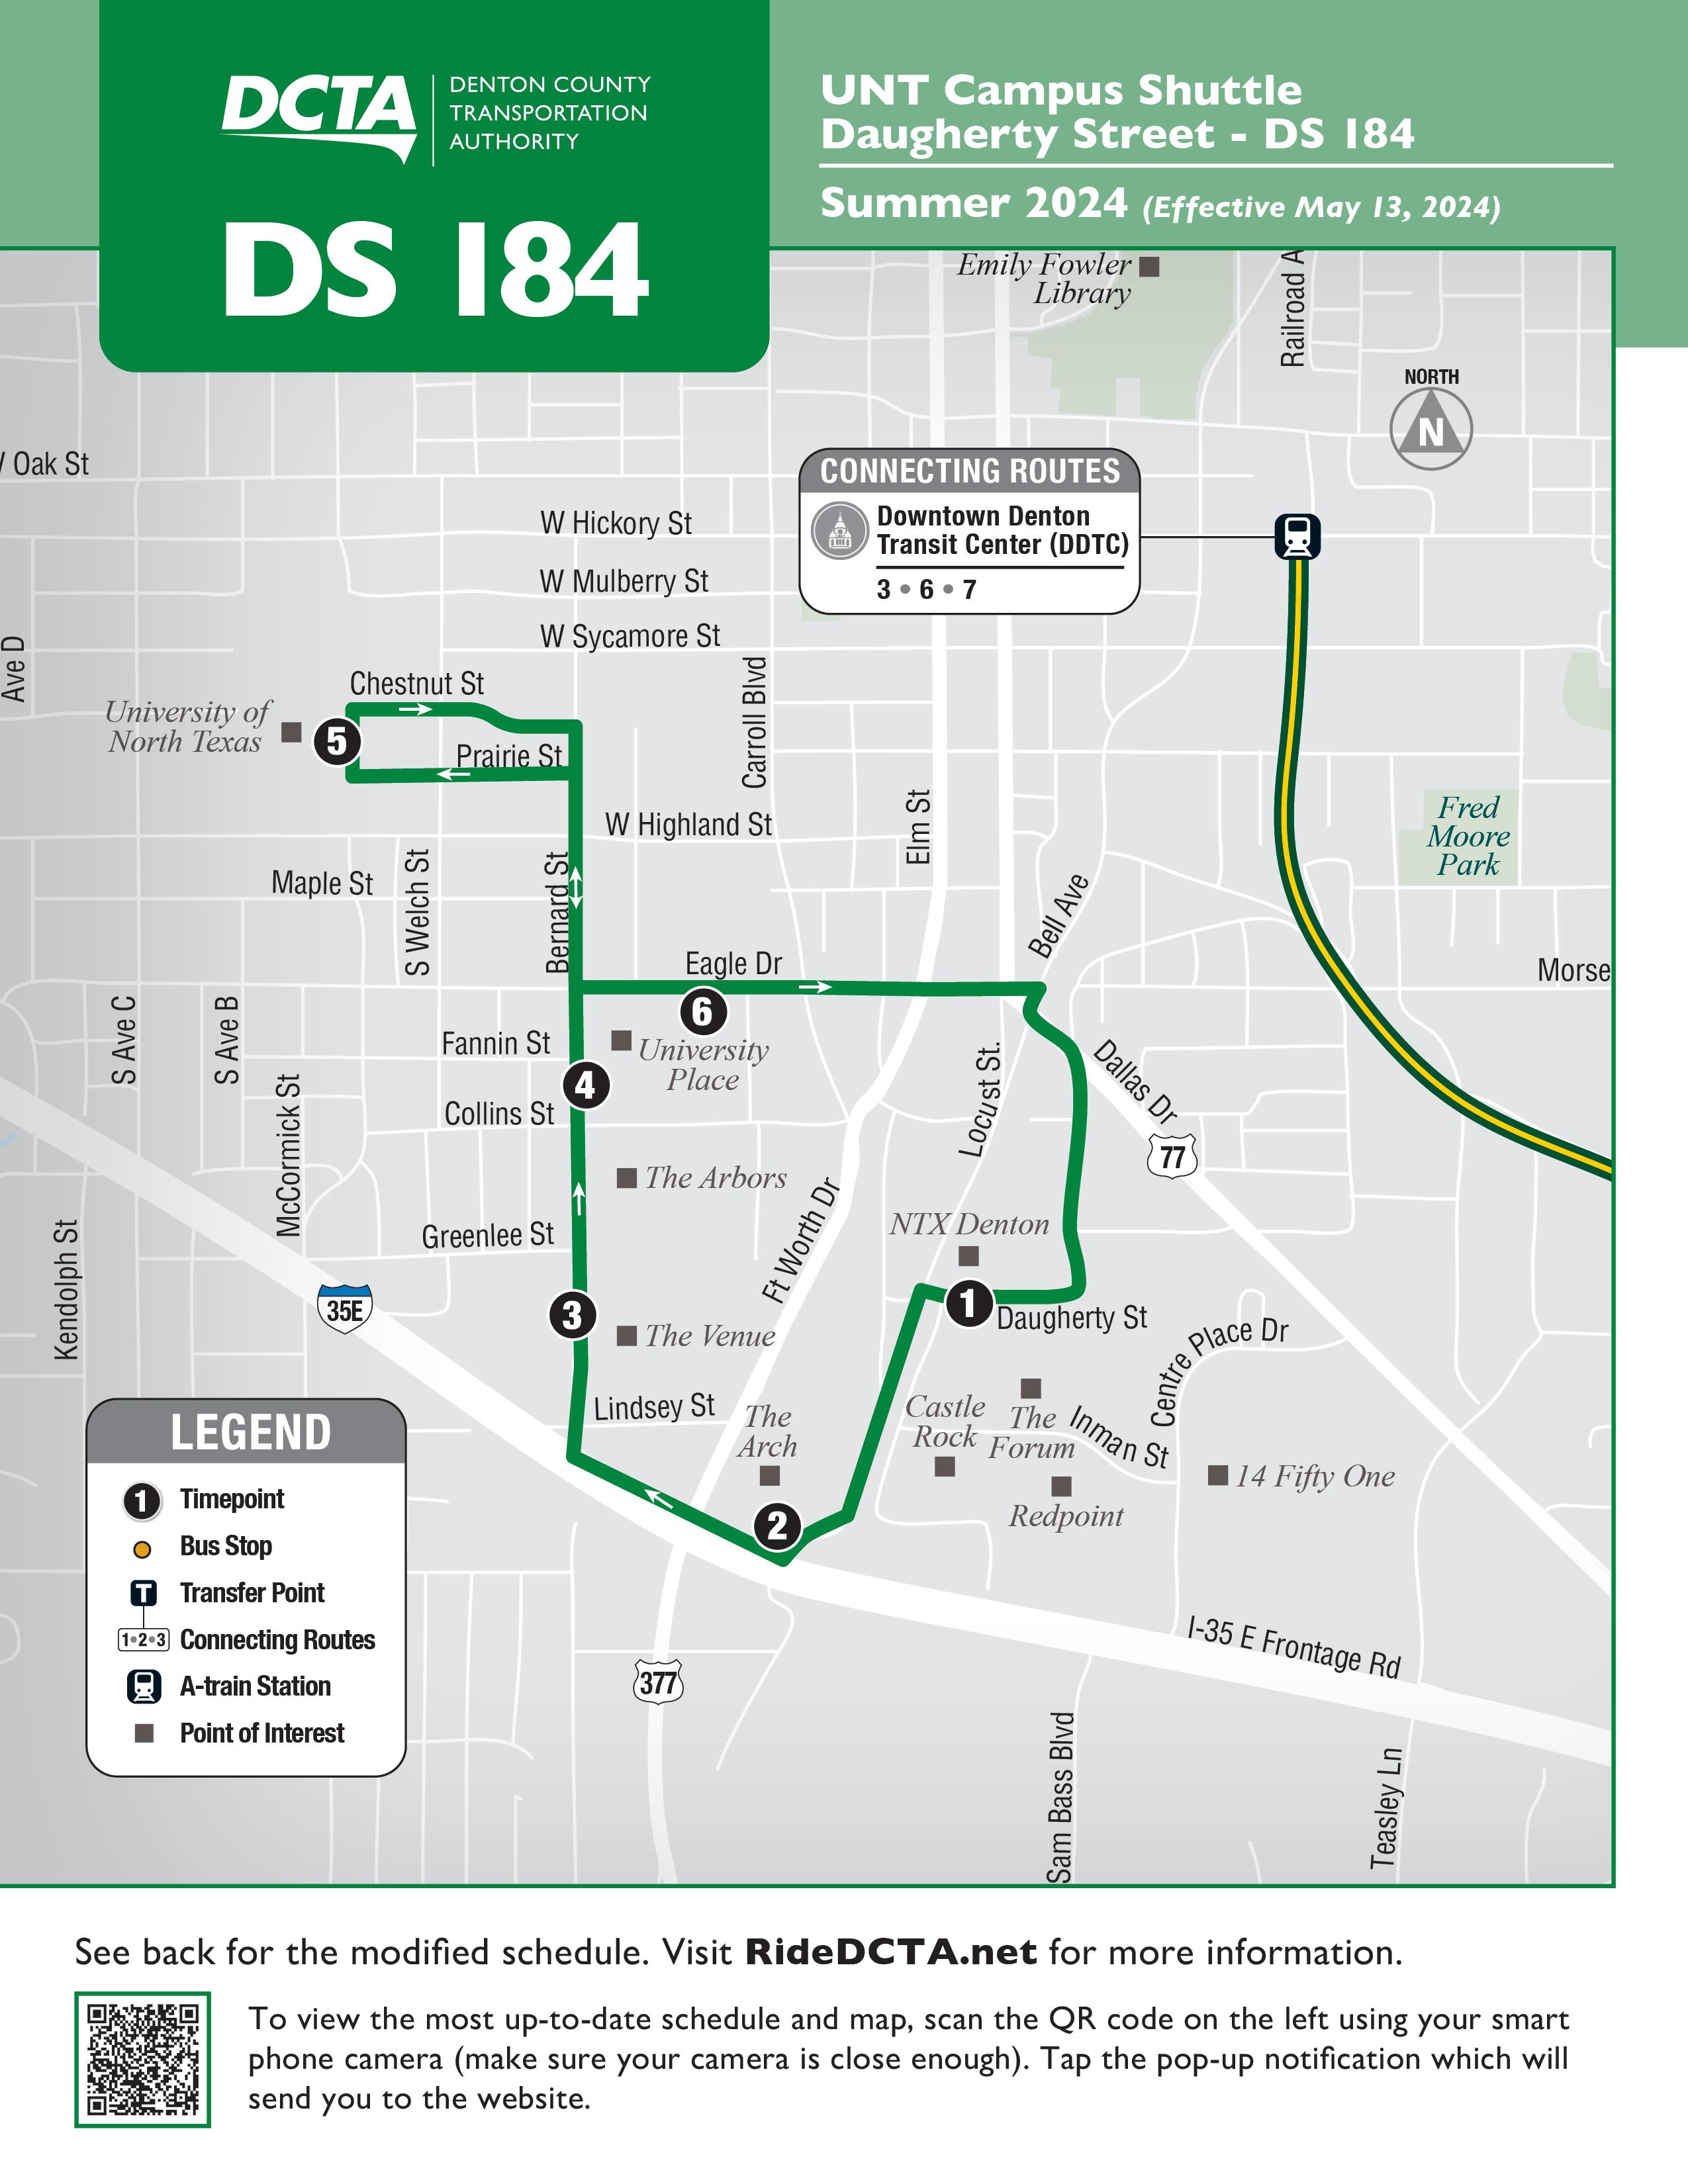 DS 184 Summer Route FY24 Map